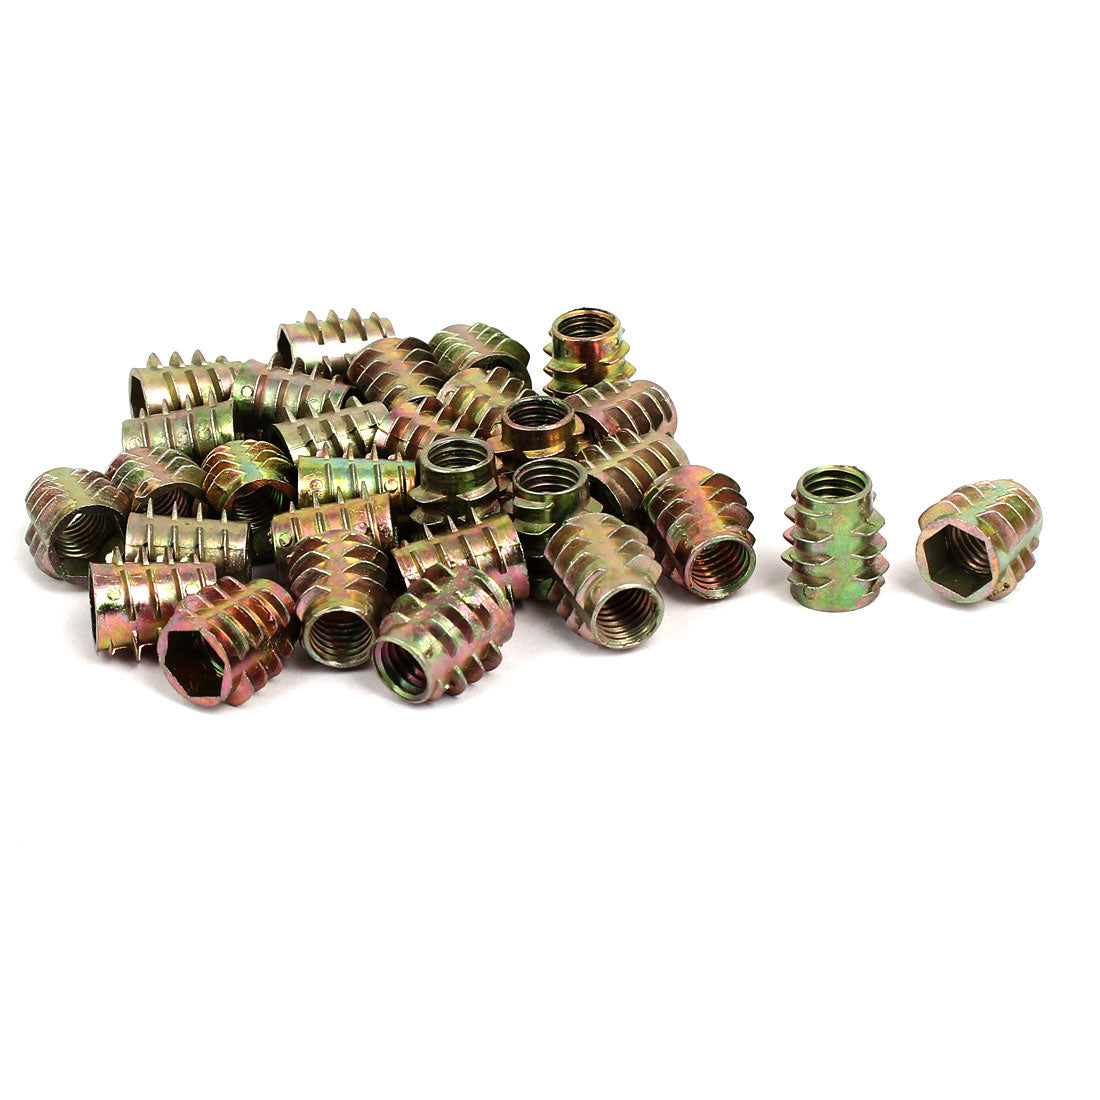 uxcell Uxcell M8x15mm Hex Socket Threaded Insert Nuts Bronze Tone 30pcs for Wood Furniture